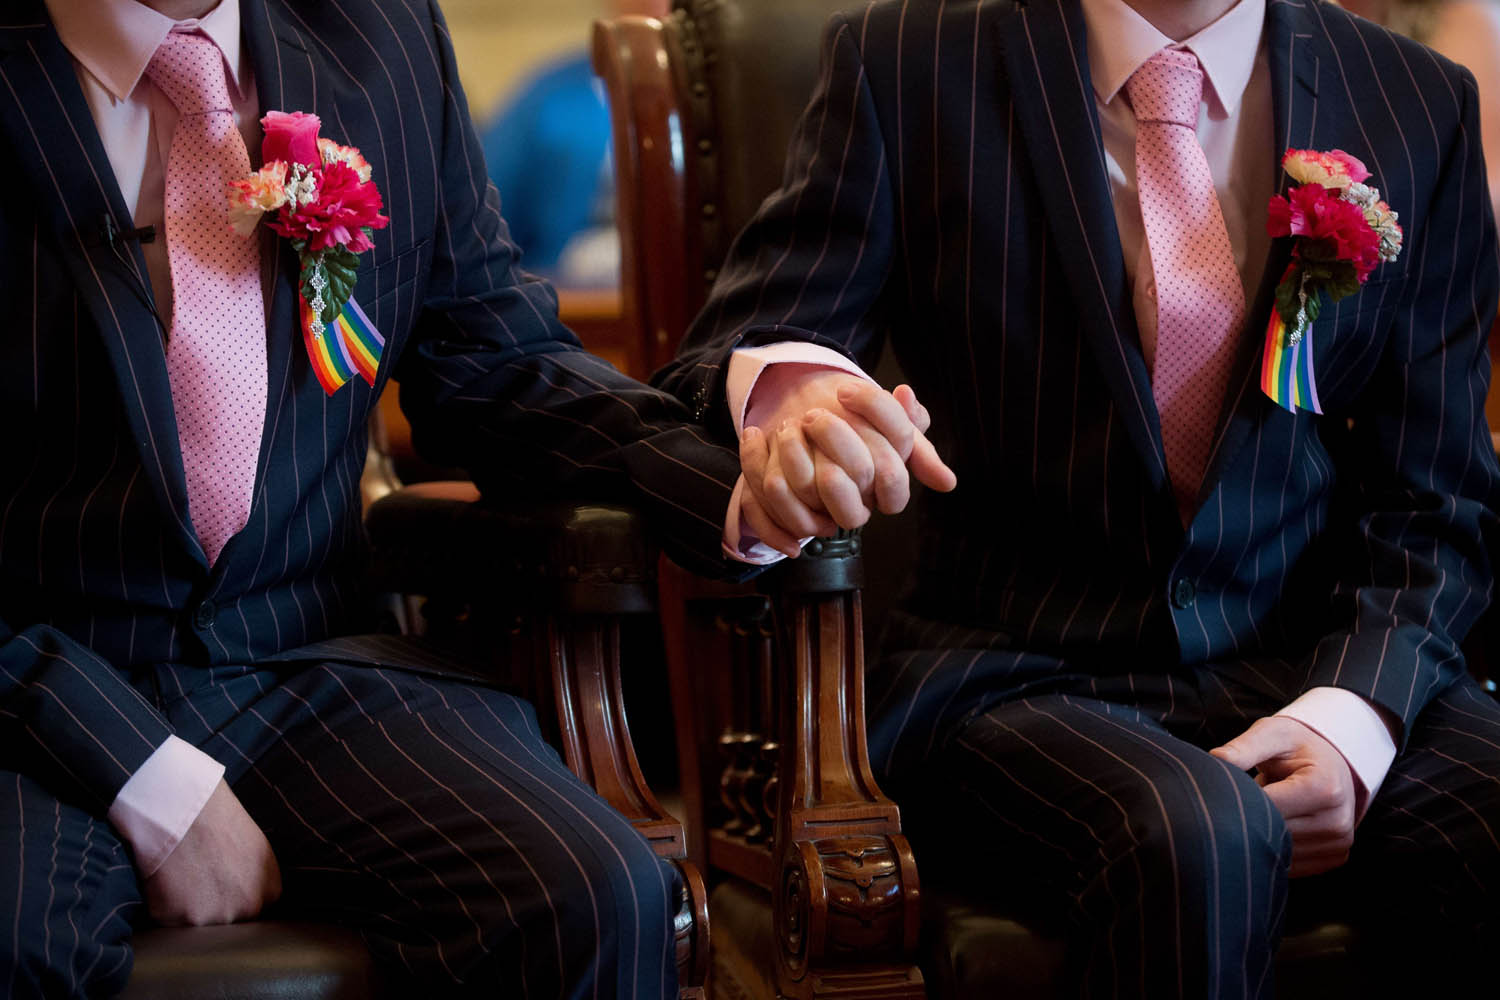 Mar. 29, 2014.
                              Phil Robathan (L) and James Preston (R) hold hands during their wedding ceremony in Brighton, southern England. Gay couples across England and Wales said  I do  as a law legalizing same-sex marriage came into effect at midnight, the final stage in a long fight for equality.